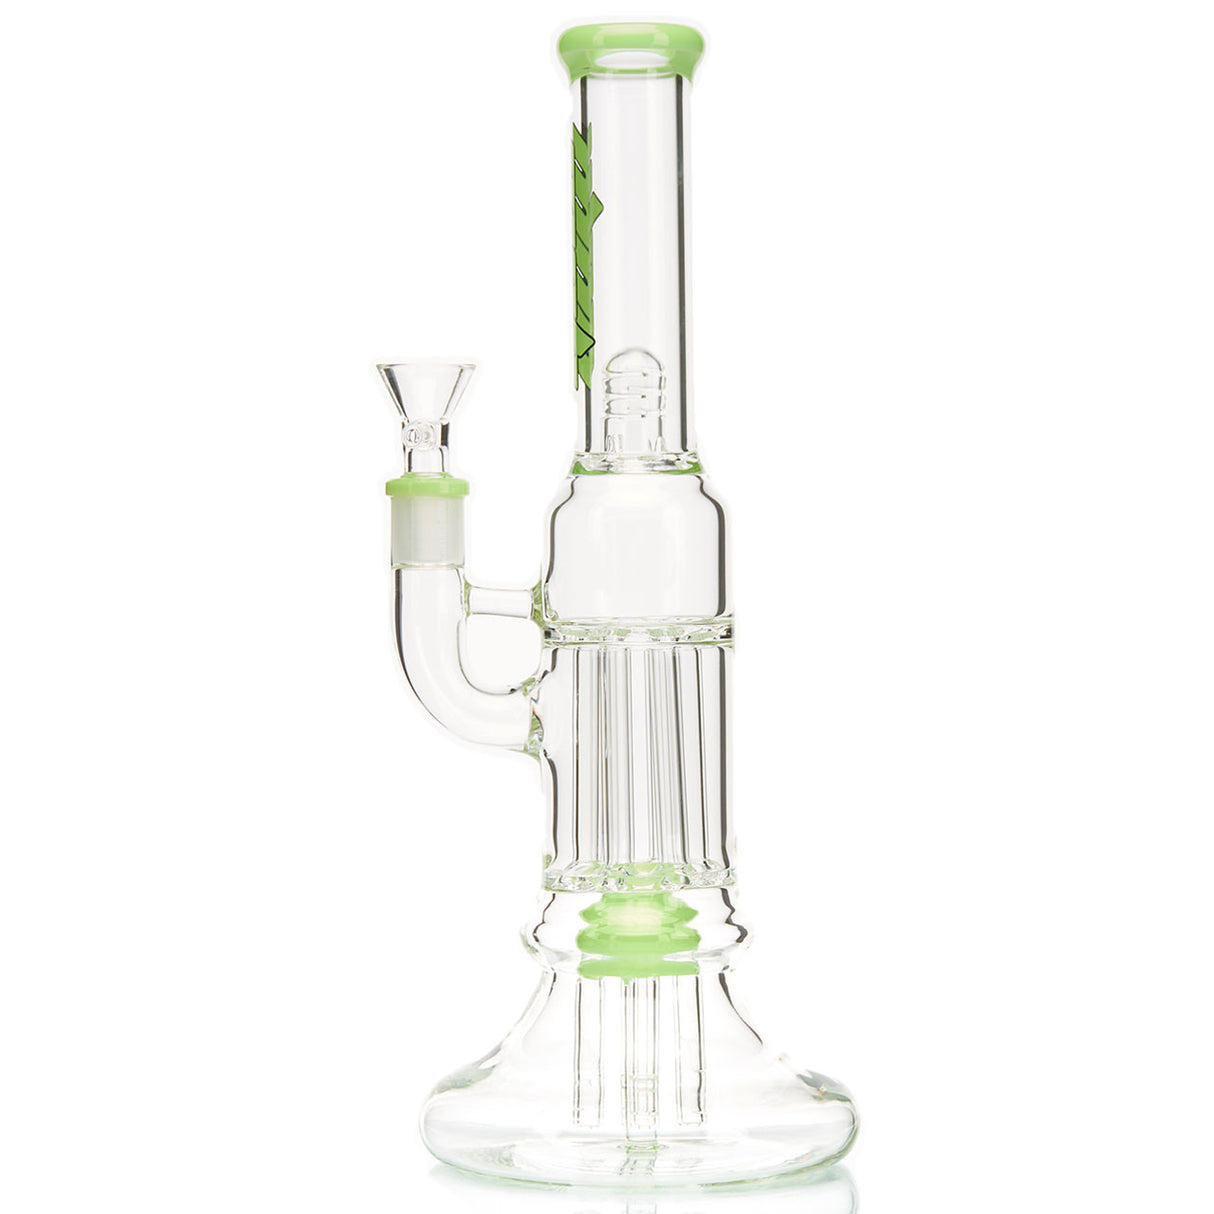 MOB Glass Obelisk Water Pipe with Double Tree Perc and Splashguard in Green Slime Color